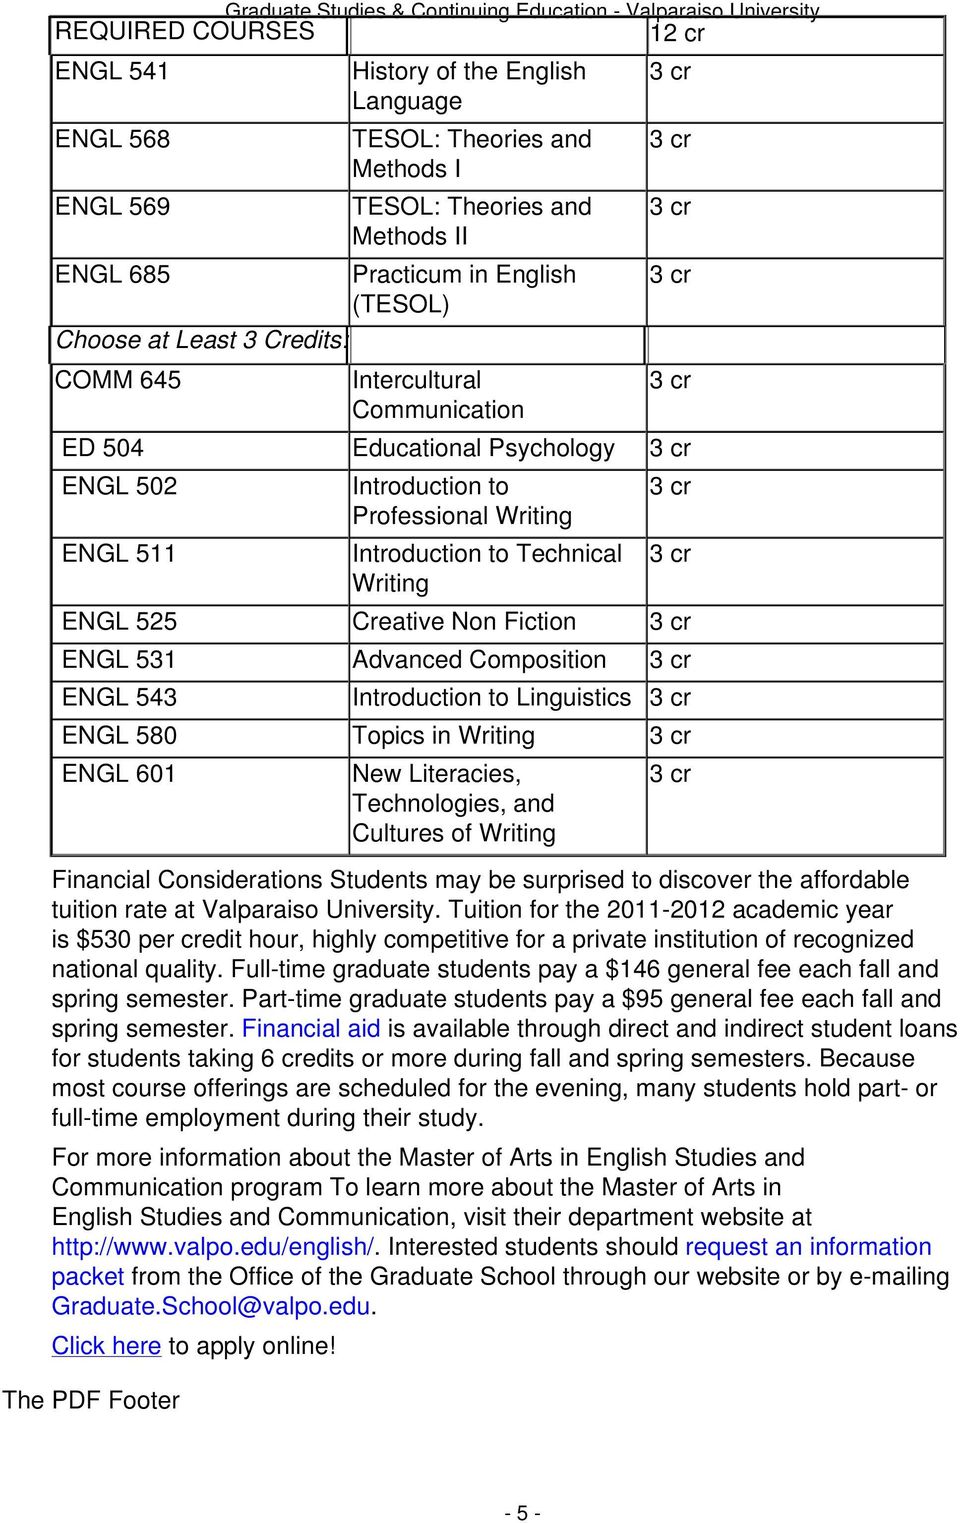 Composition ENGL 543 Introduction to Linguistics ENGL 580 Topics in ENGL 601 New Literacies, Technologies, and Cultures of Financial Considerations Students may be surprised to discover the